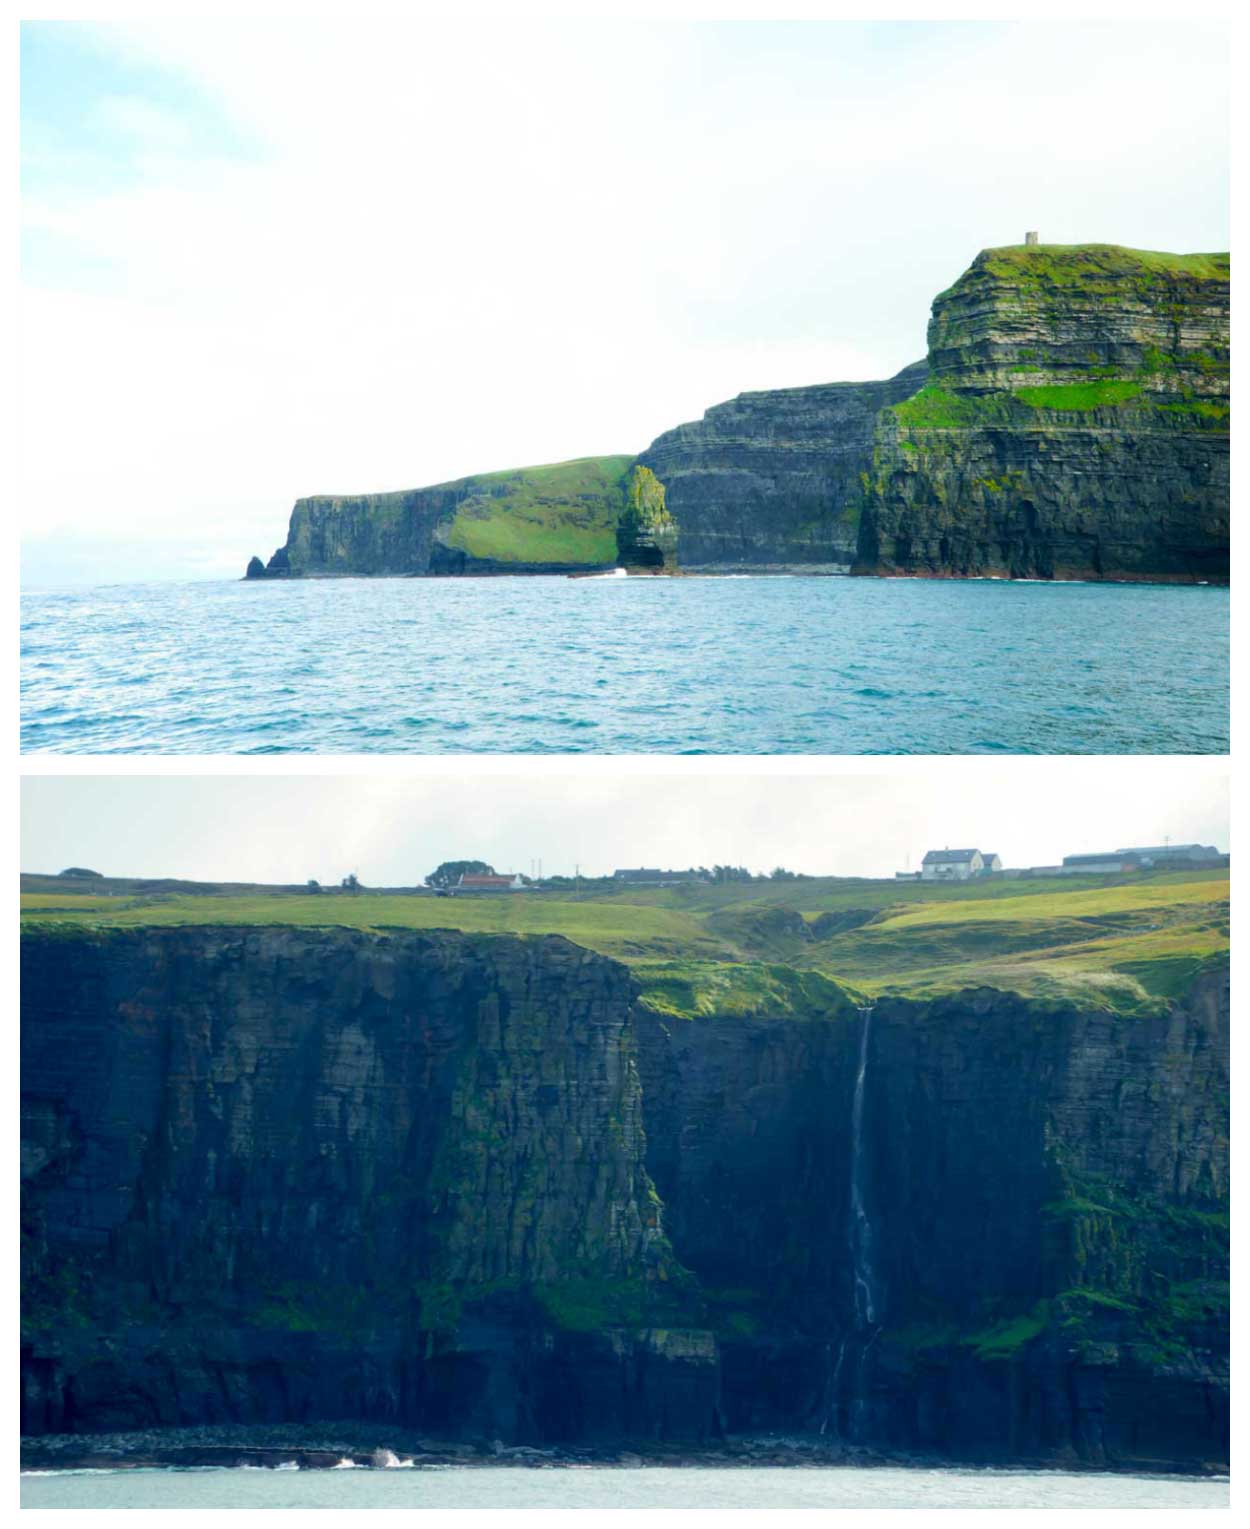 The Cliffs of Moher from the sea